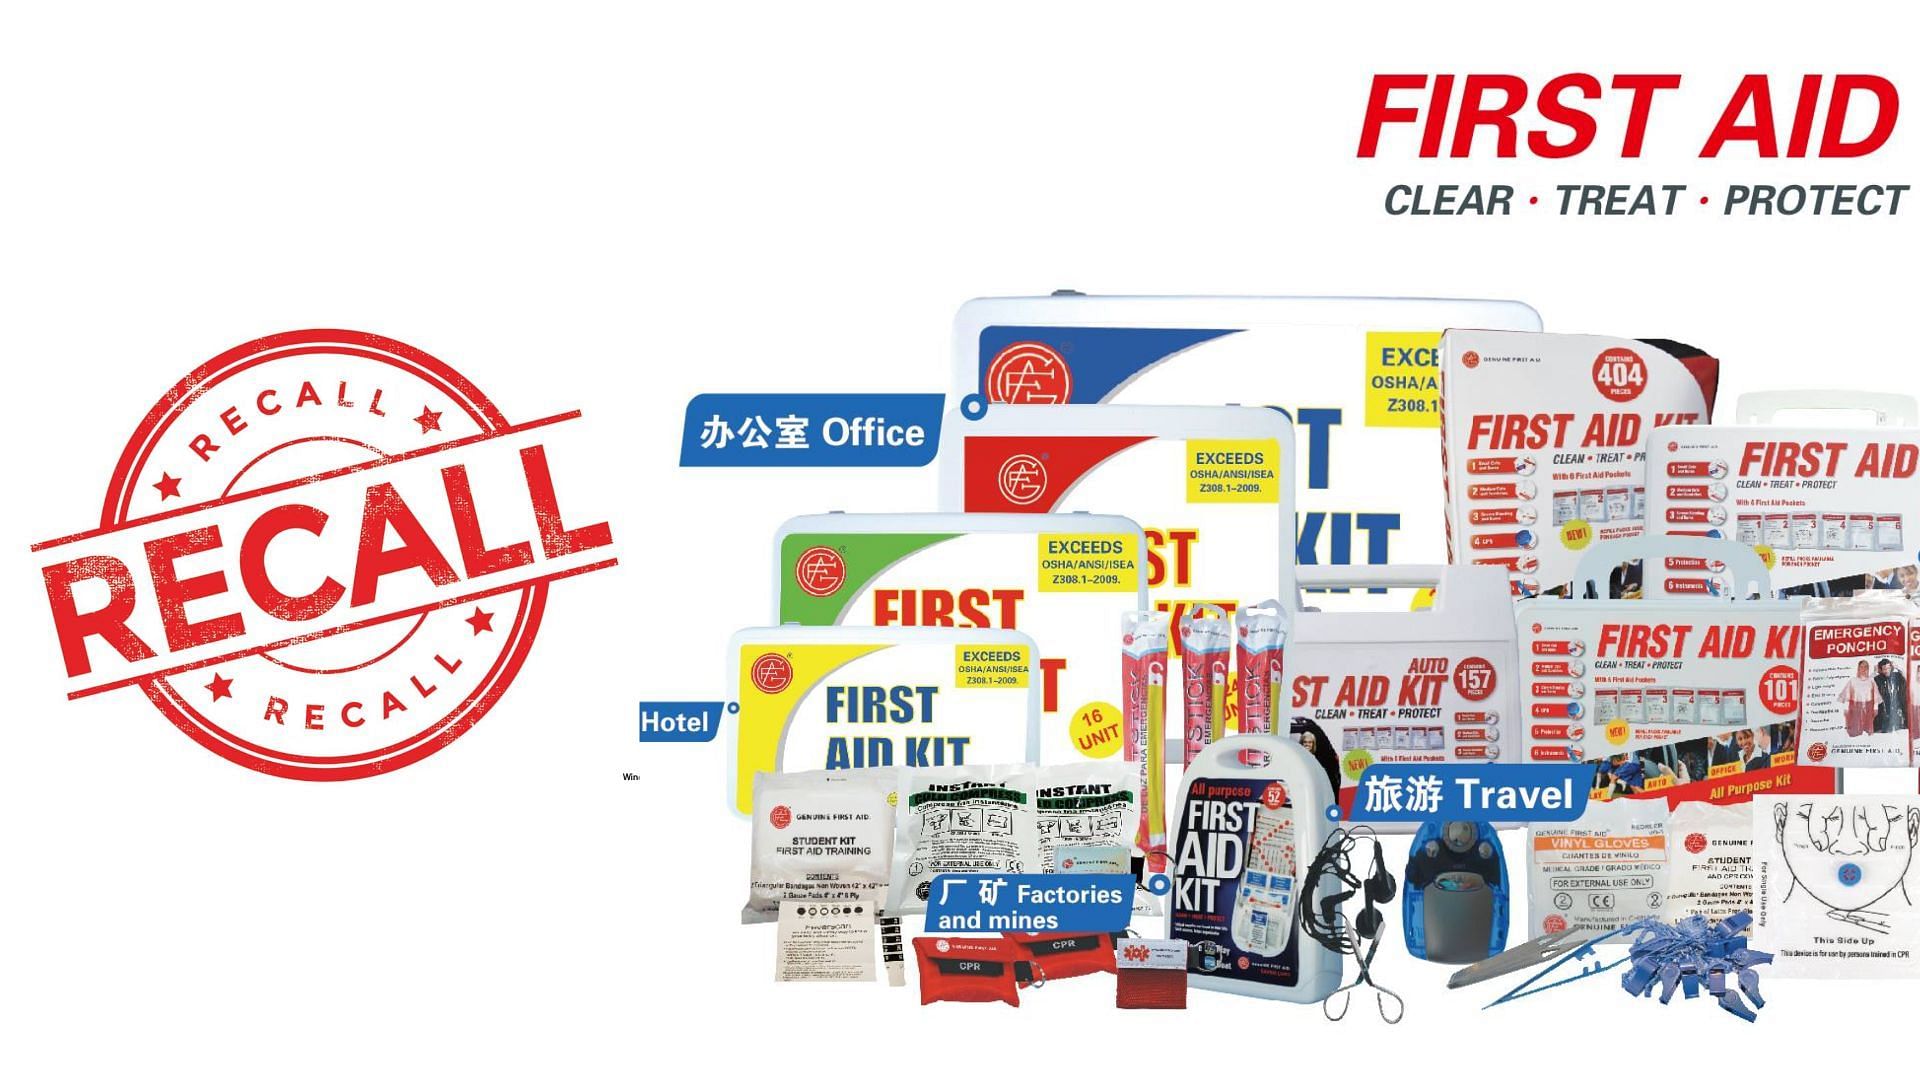 Easy Care first aid kits recalled over concerns of microbial contamination (Image via GFA Production)